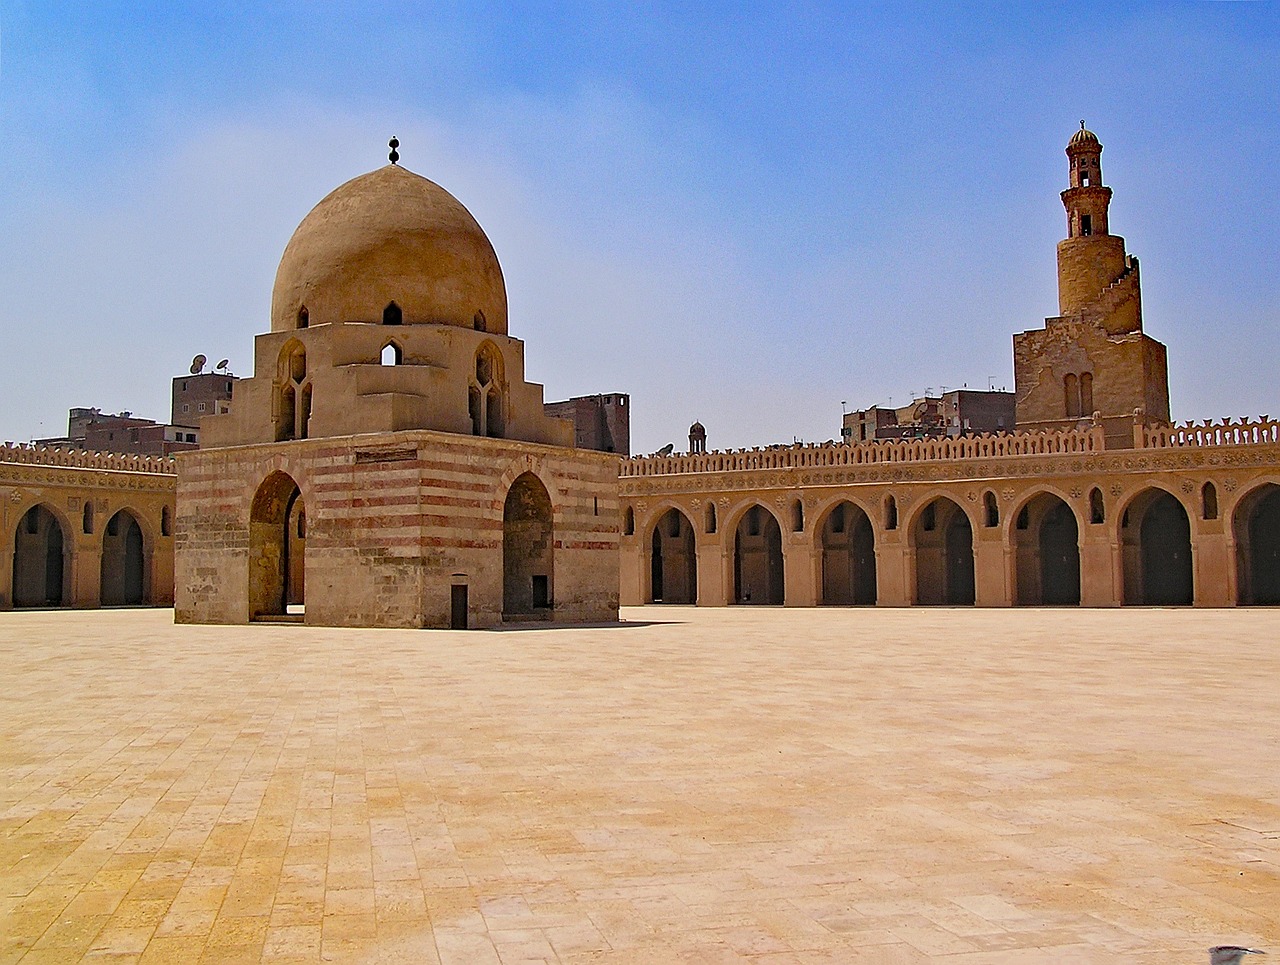 a large building with a dome on top of it, egyptian art, by Youssef Howayek, flickr, dau-al-set, a wide open courtyard in an epic, wide long view, deserted, he is in a mosque